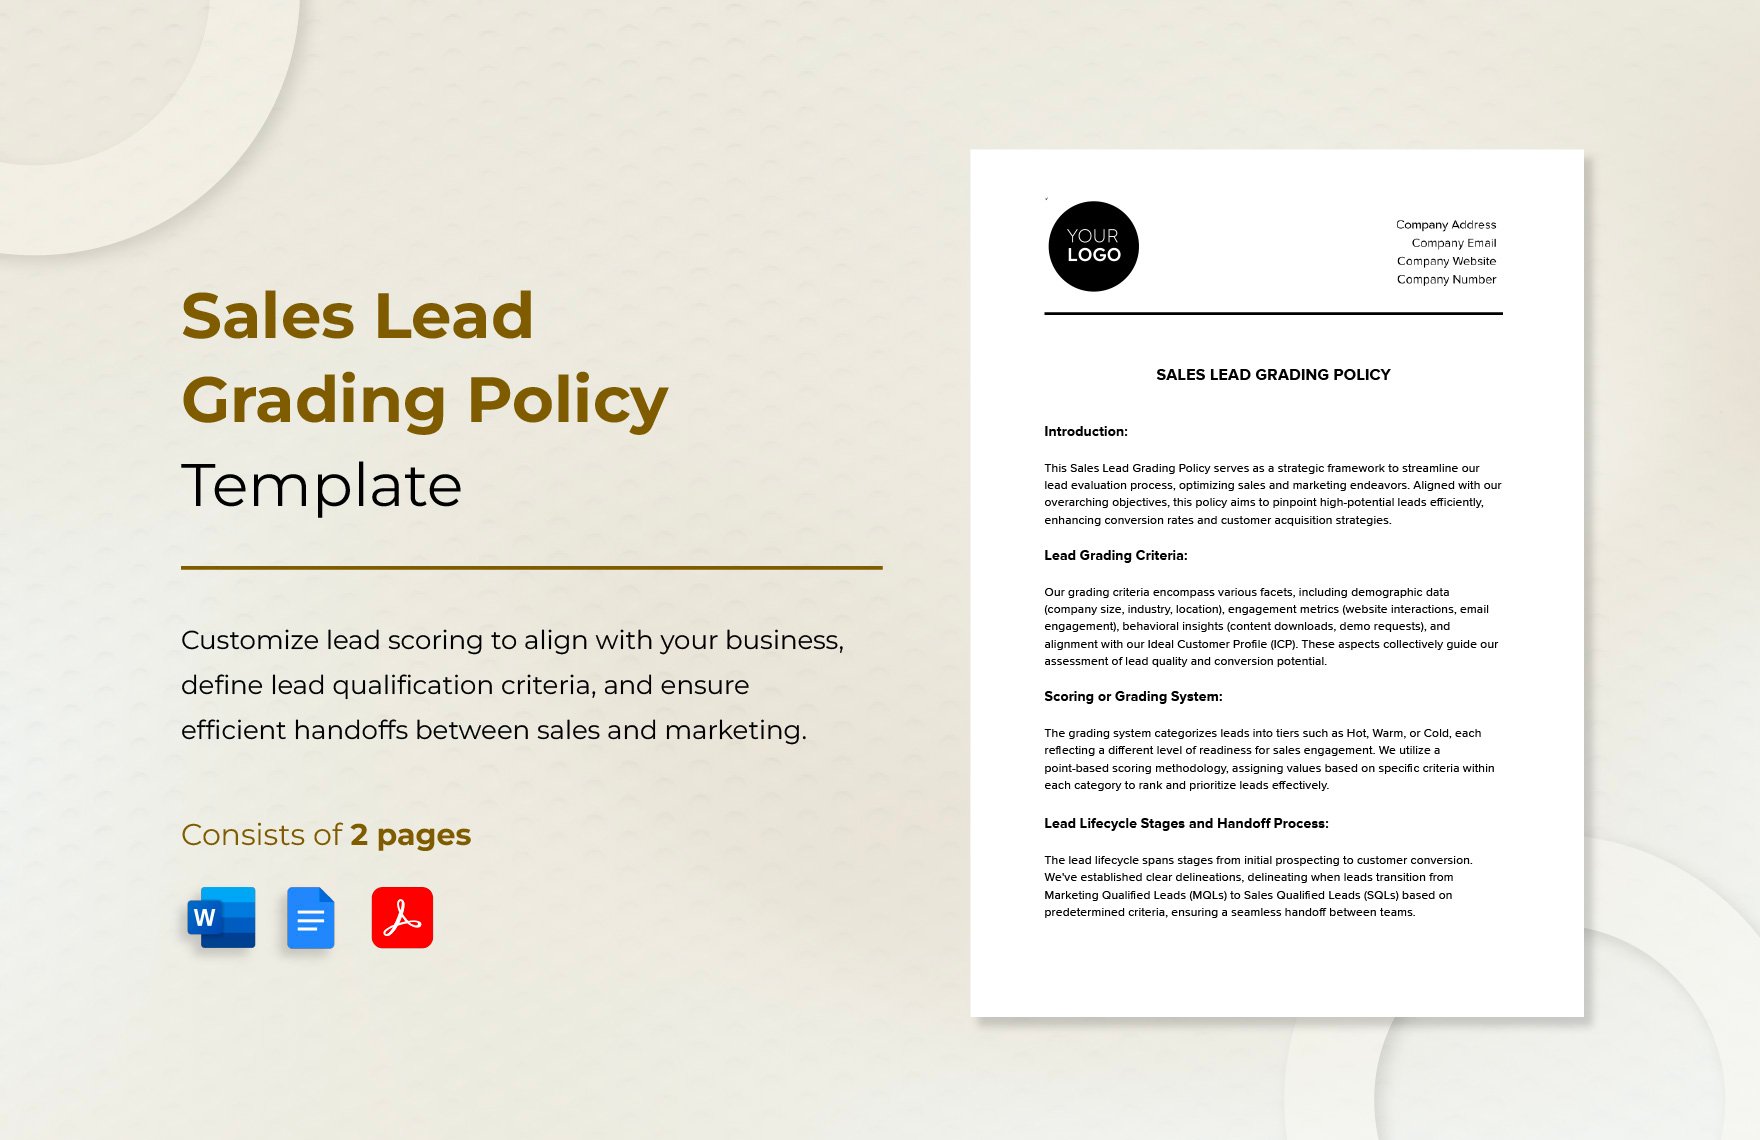 Sales Lead Grading Policy Template in Word, Google Docs, PDF